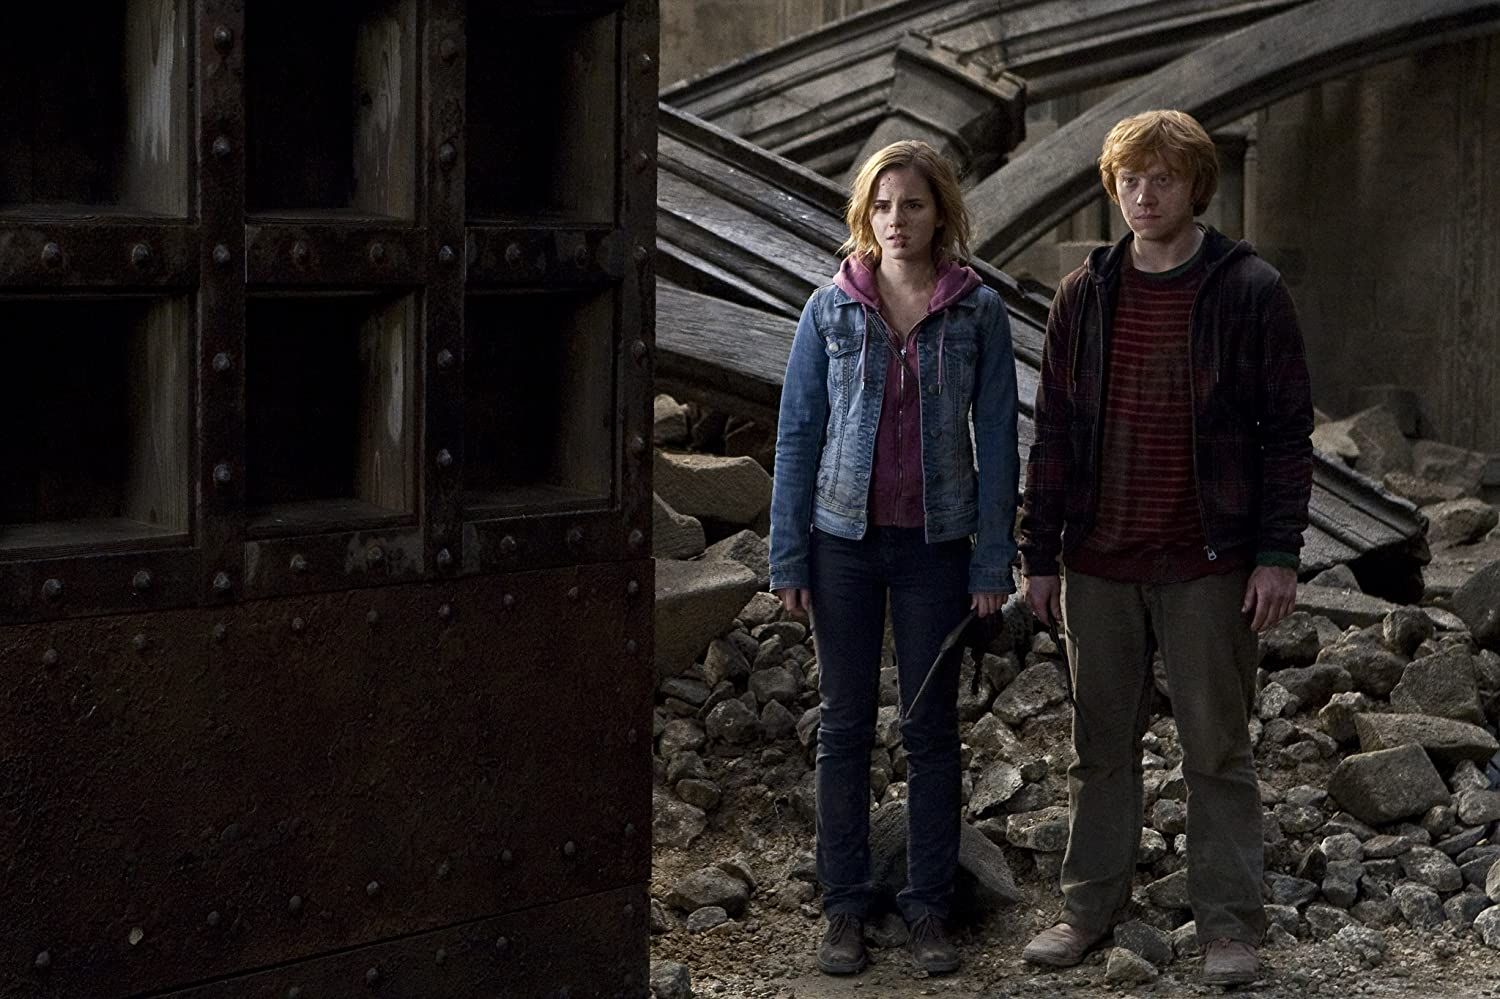 In Harry Potter and the Chamber of Secrets, you can see that Ron's